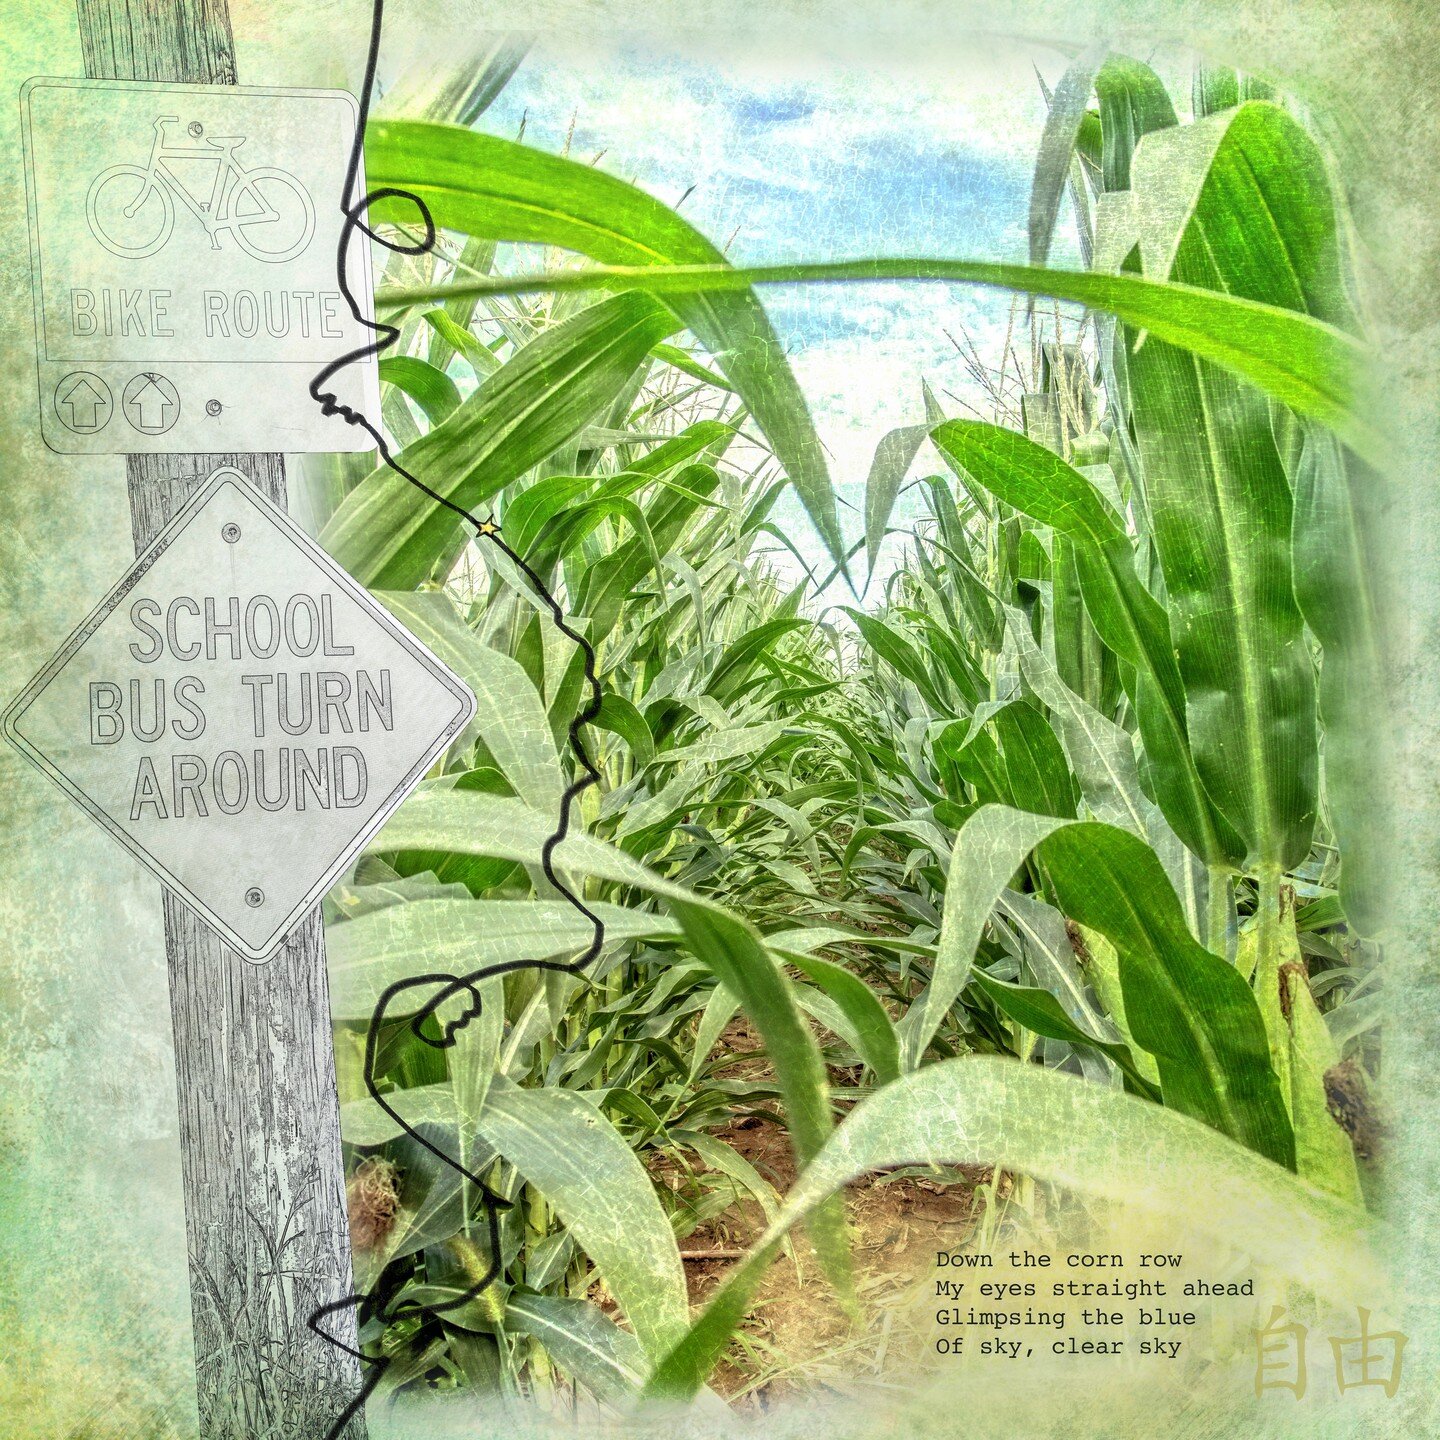 Down the corn row
My eyes straight ahead
Glimpsing the blue
Of sky, clear sky

This is #7 in my Licorice Trail series titled &quot;Down the Corn Row.&quot; 
.
.
#bikeride #bikelife #bike #cycling #cyclist #traveling #roadtrip #travel #farming #agricu